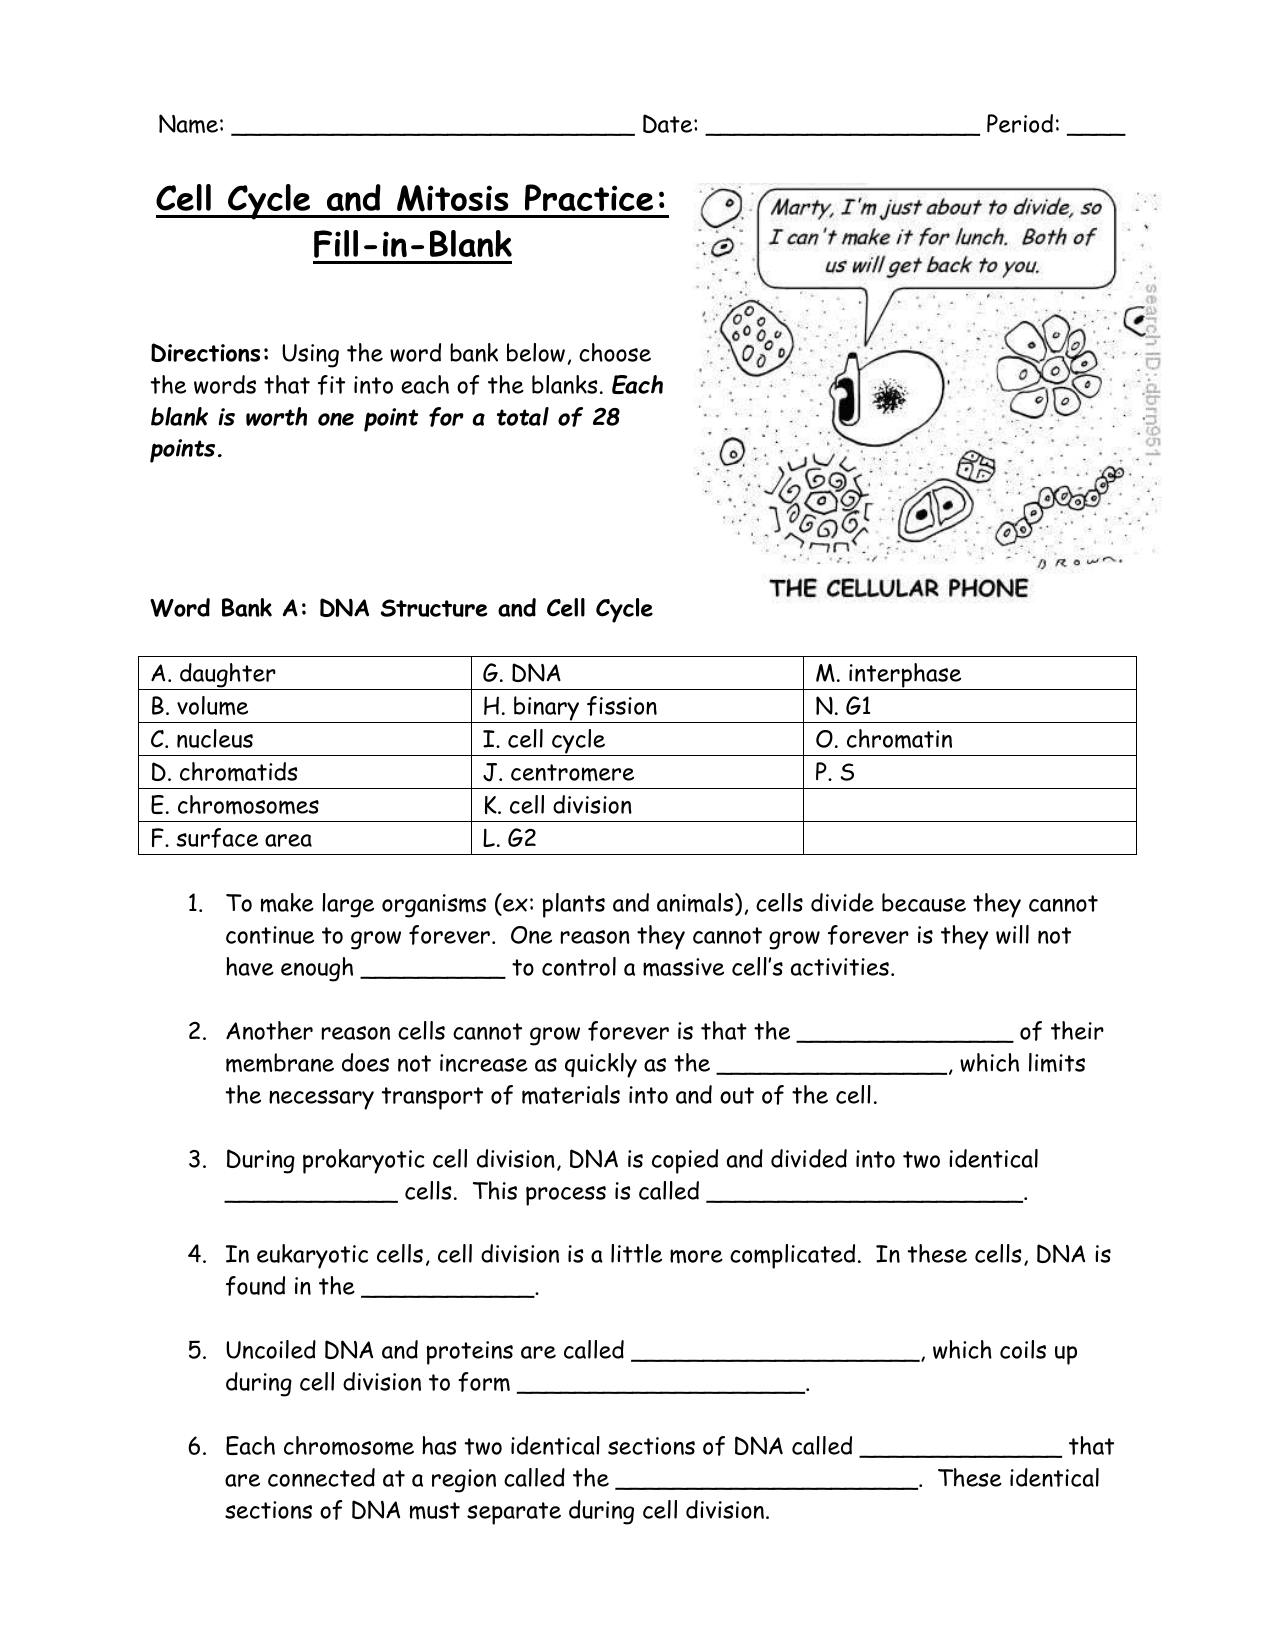 Mitosis Fill-in-the-Blank Worksheet Throughout Cell Cycle And Mitosis Worksheet